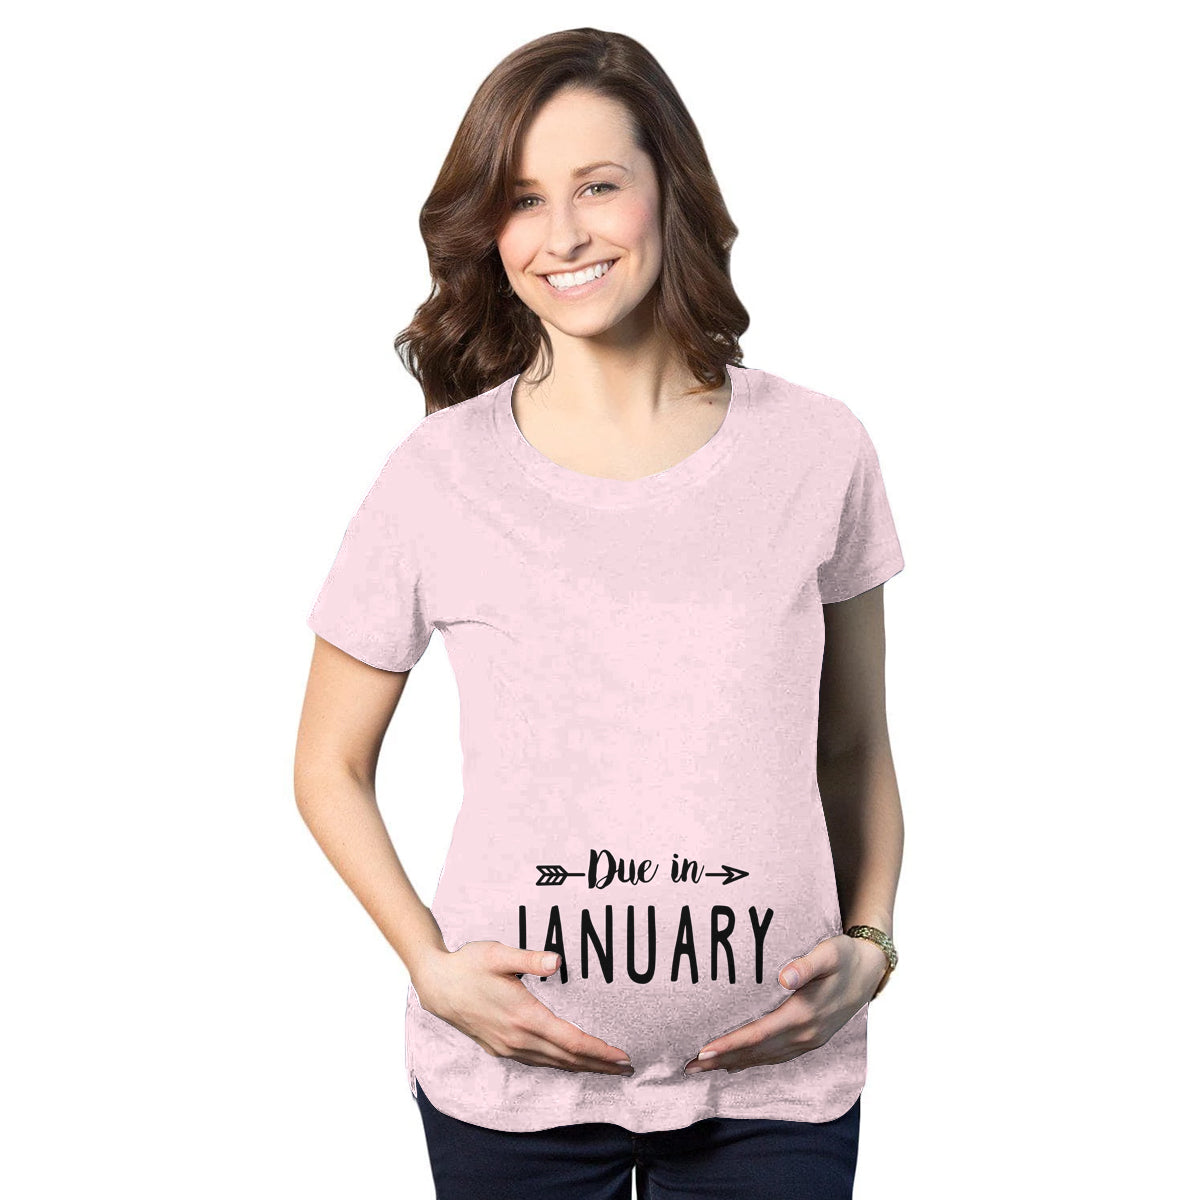 Due in January Maternity T-Shirt